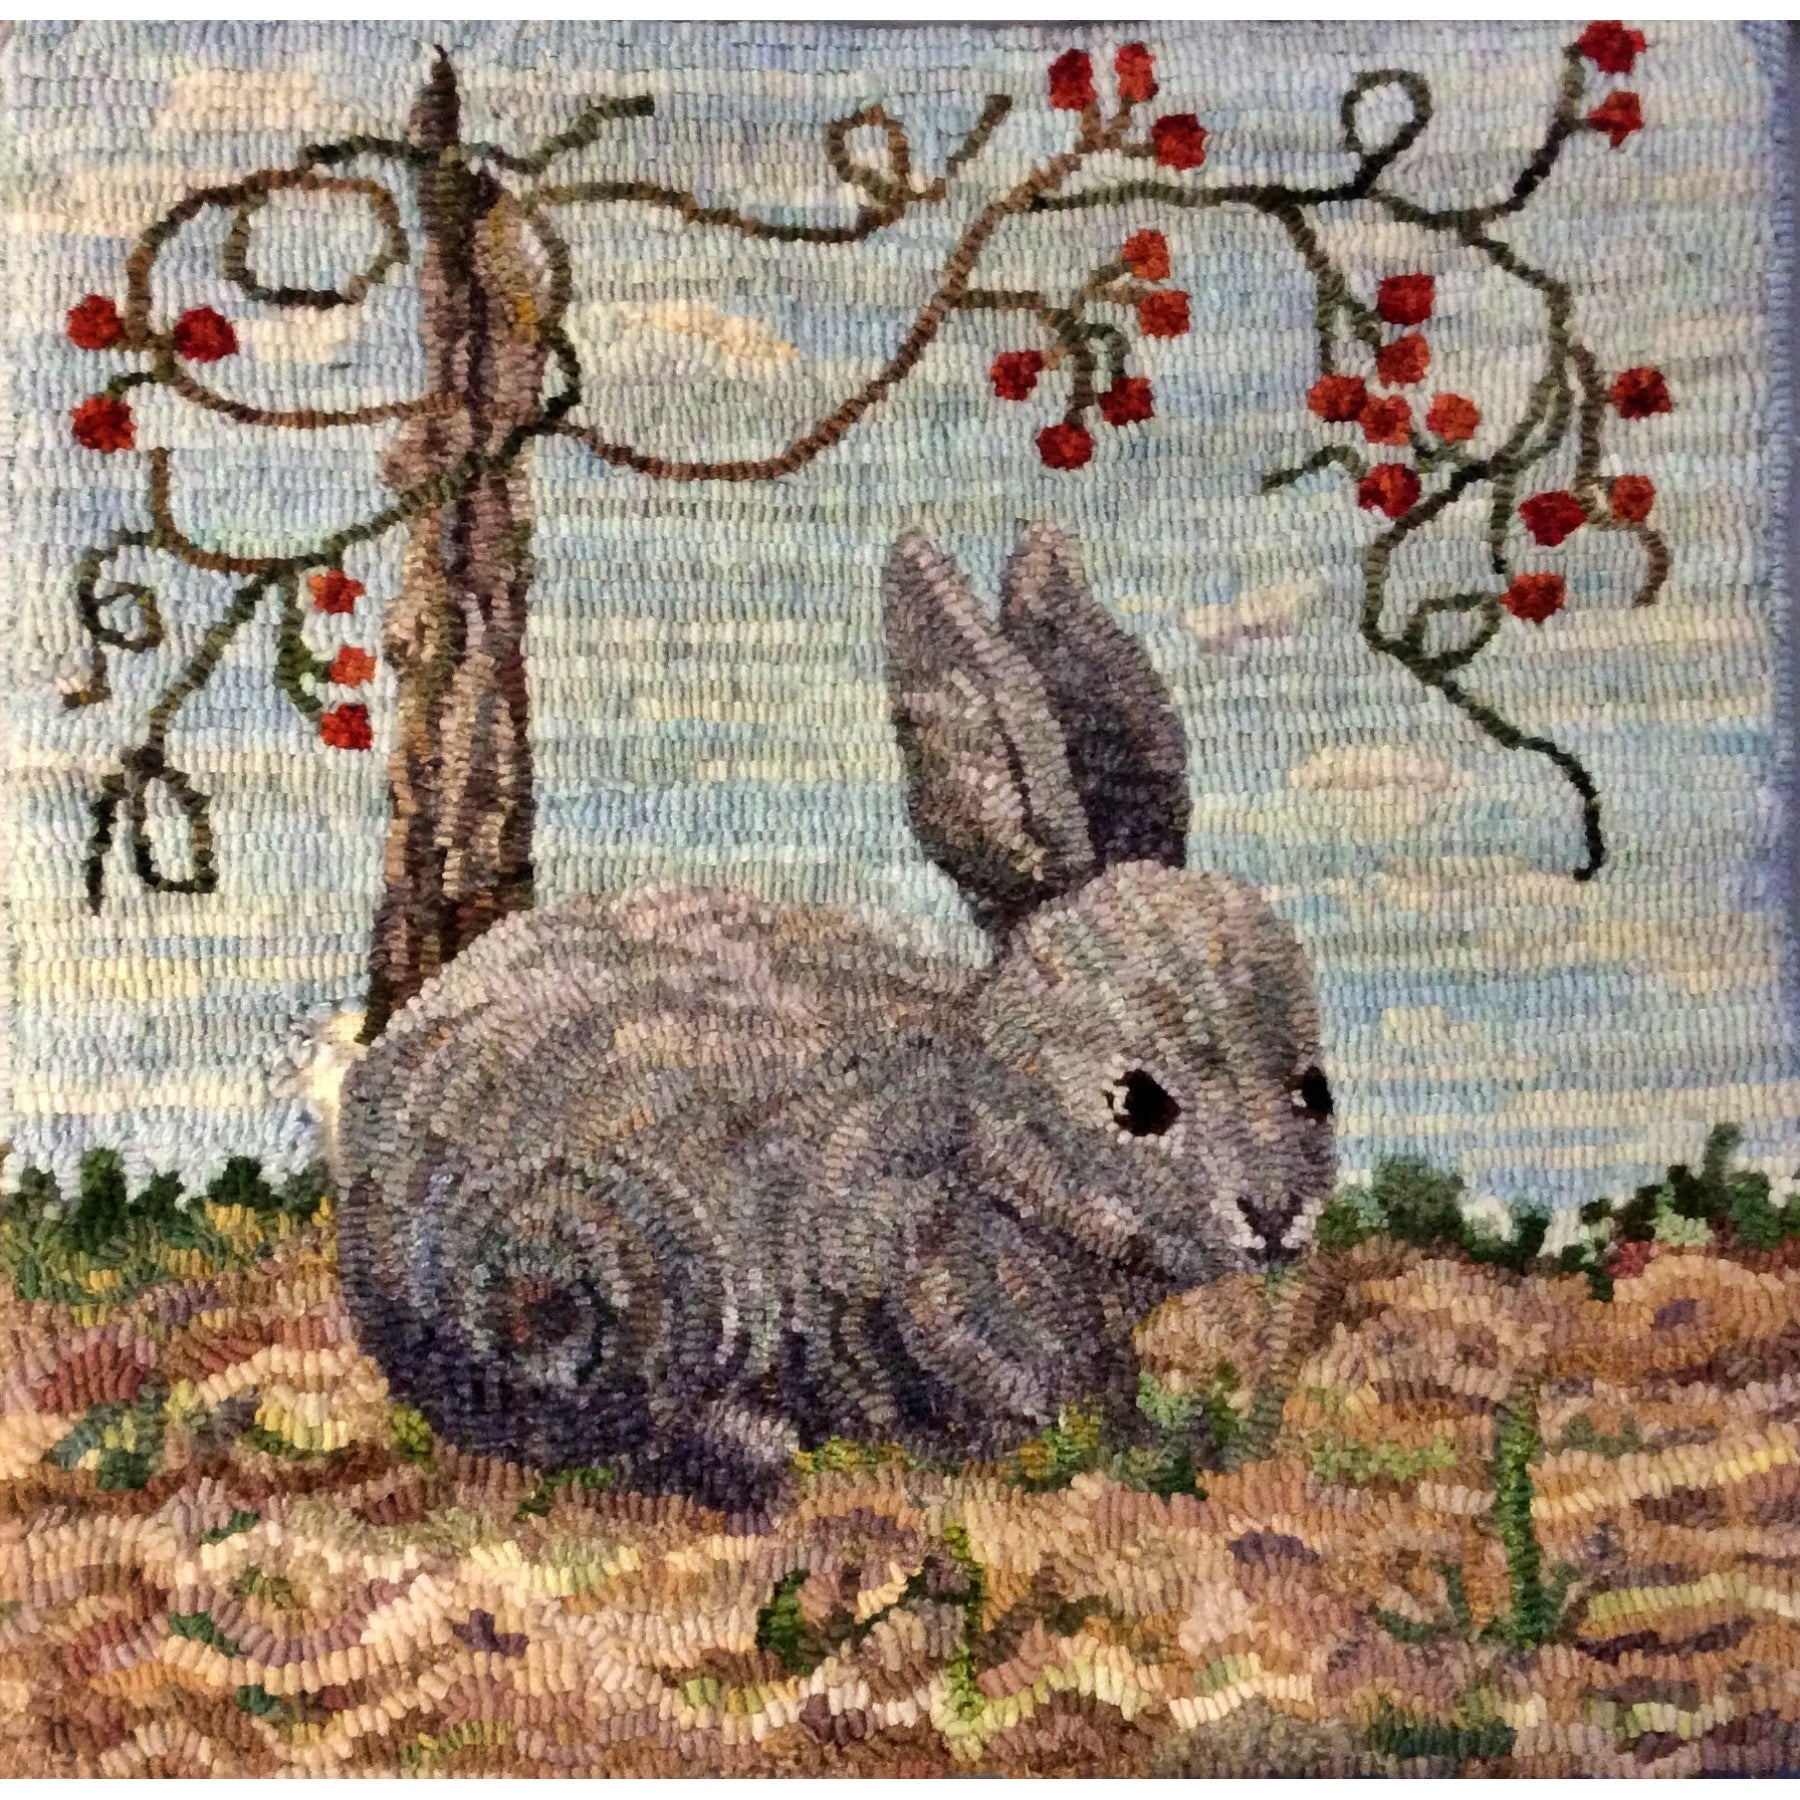 Good Little Bunny, rug hooked by Mamie Adair